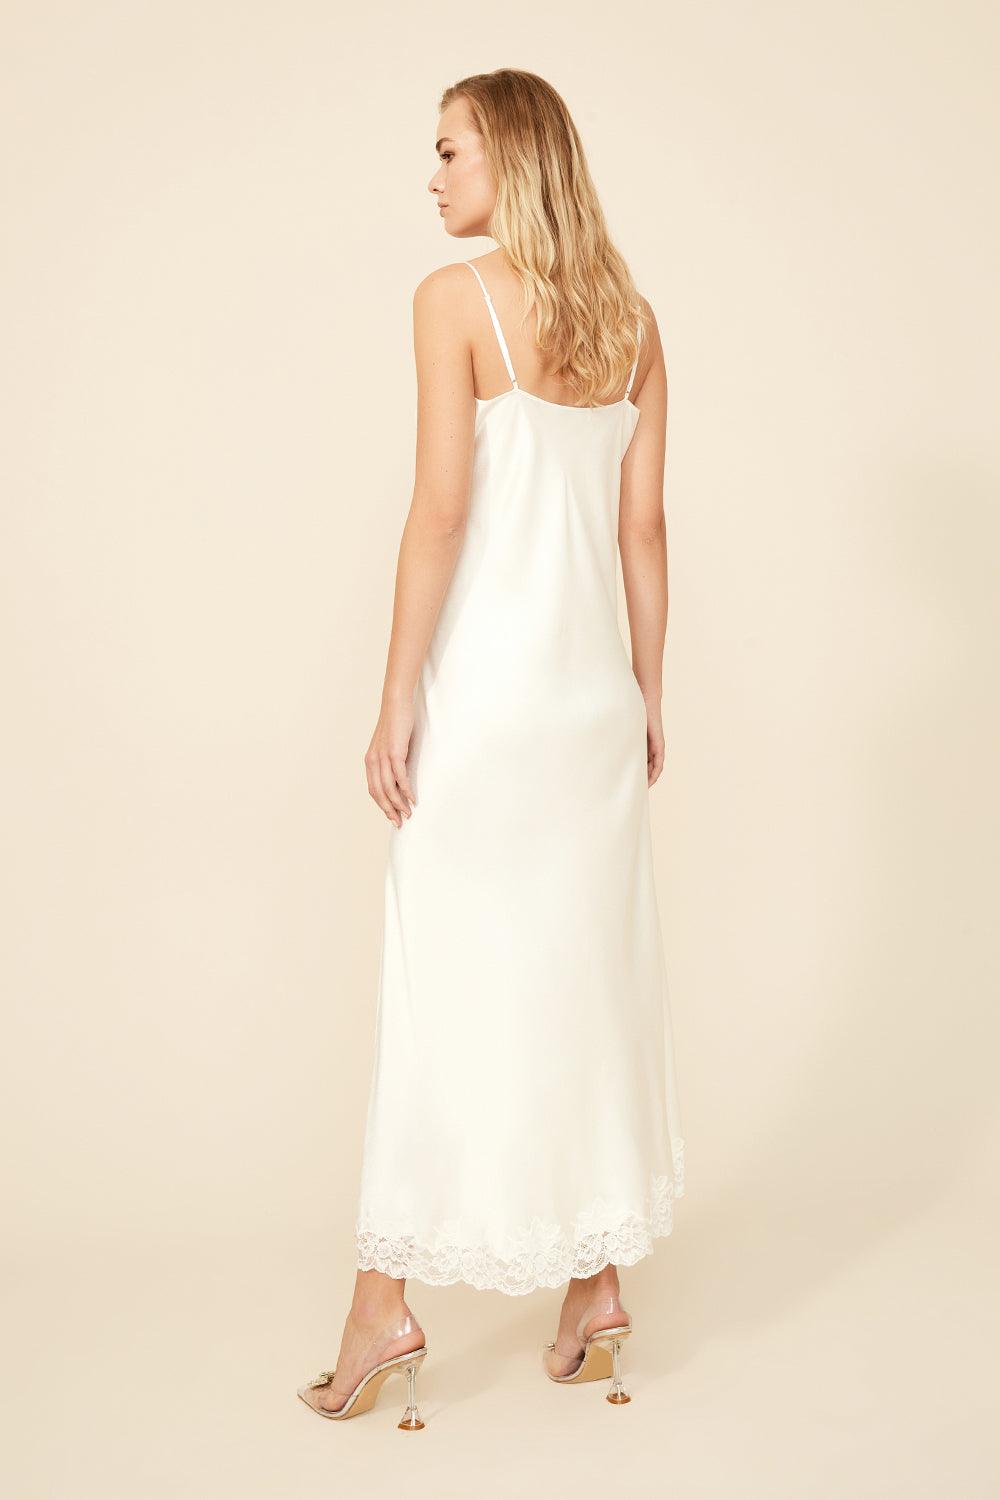 Maeve - Long Rayon Nightgown - Off White - Bocan